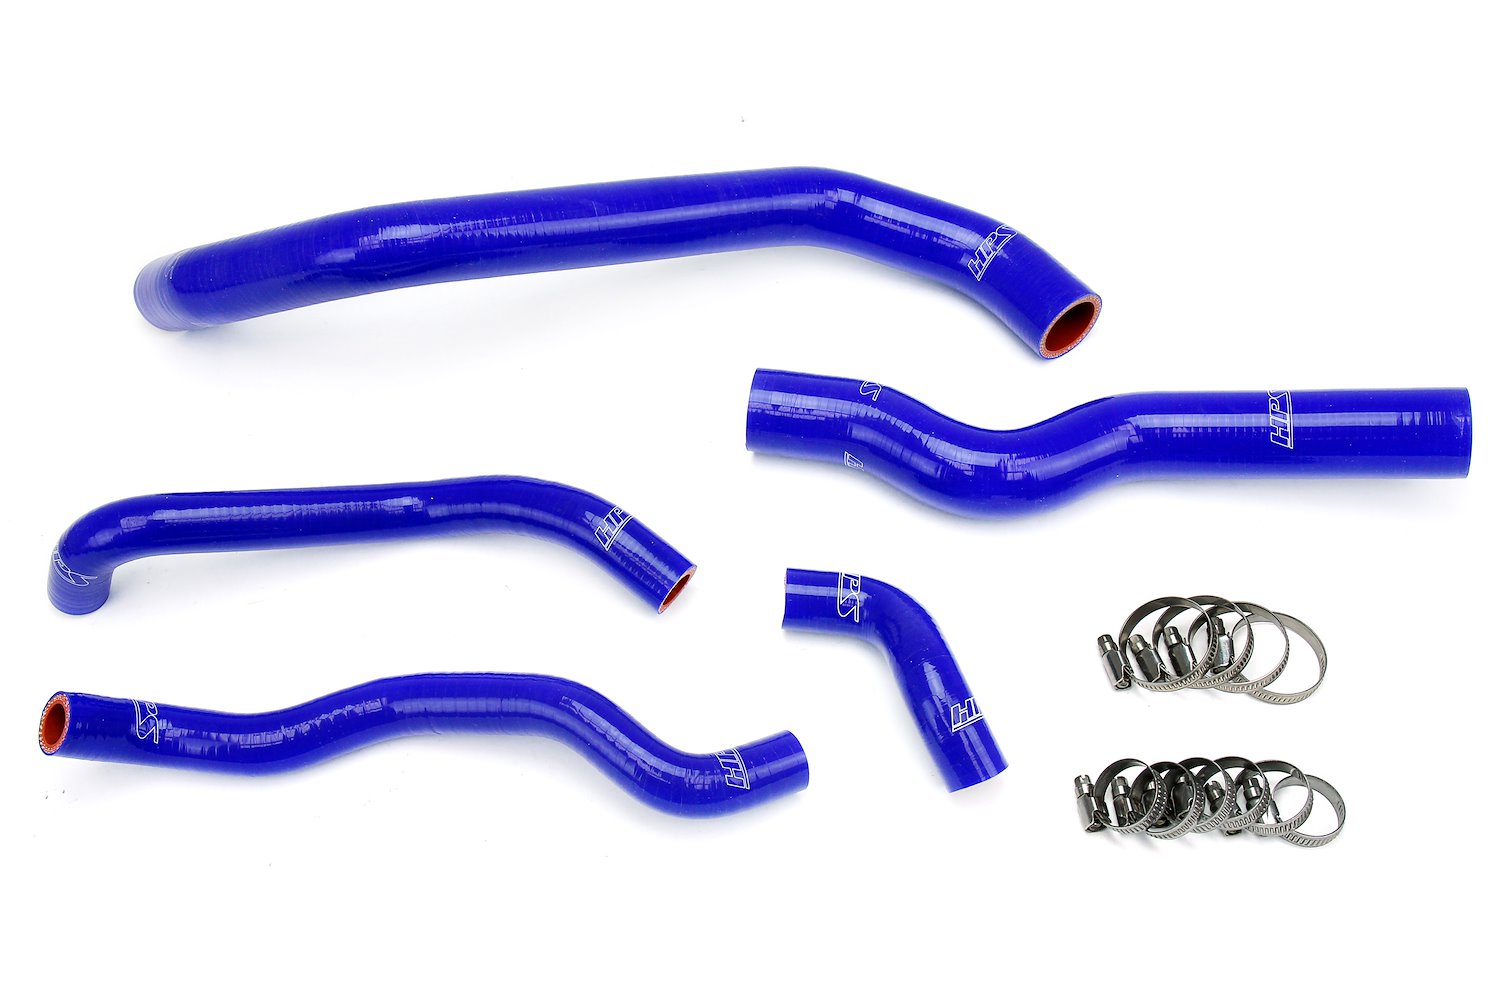 57-1973-BLUE Radiator and Heater Hose Kit, 3-Ply Reinforced Silicone, Replaces Rubber Radiator & Heater Coolant Hoses